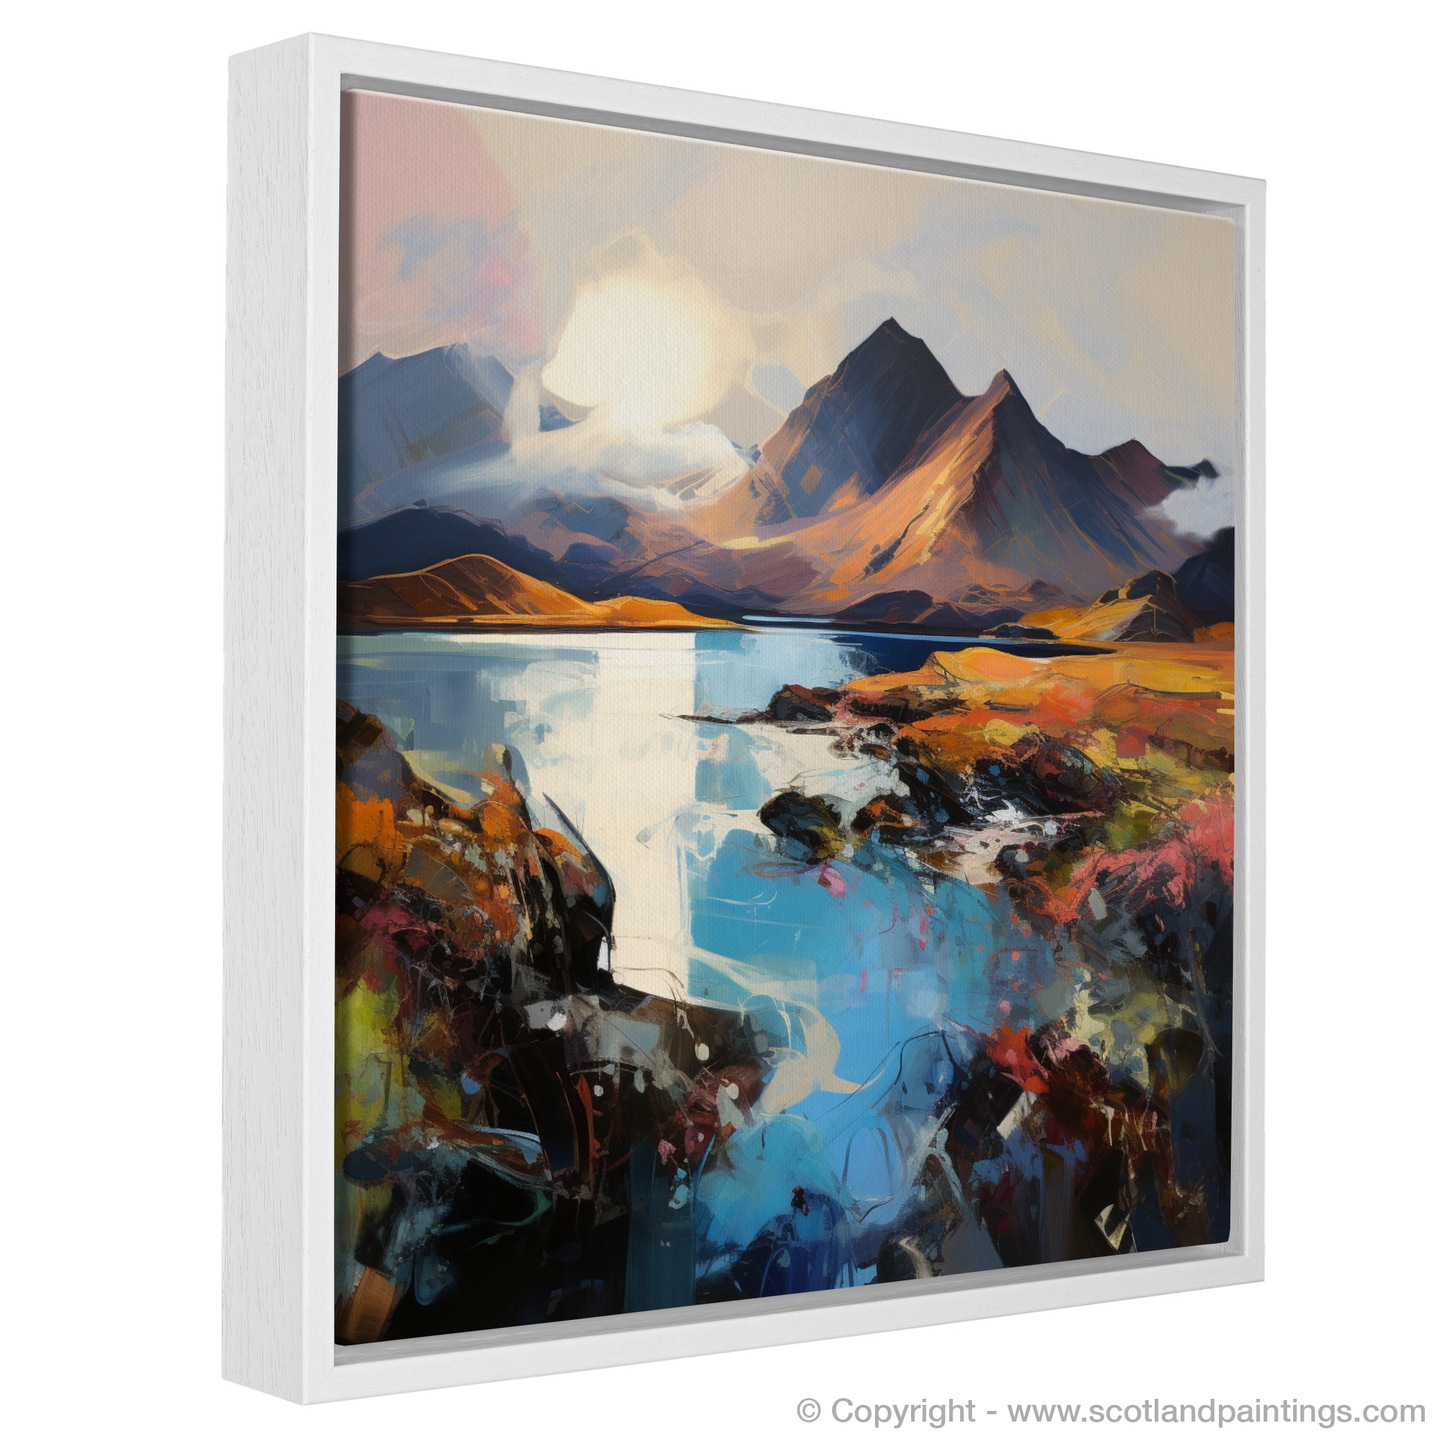 Painting and Art Print of The Cuillin, Isle of Skye entitled "Highland Dreamscape: The Untamed Majesty of The Cuillin".